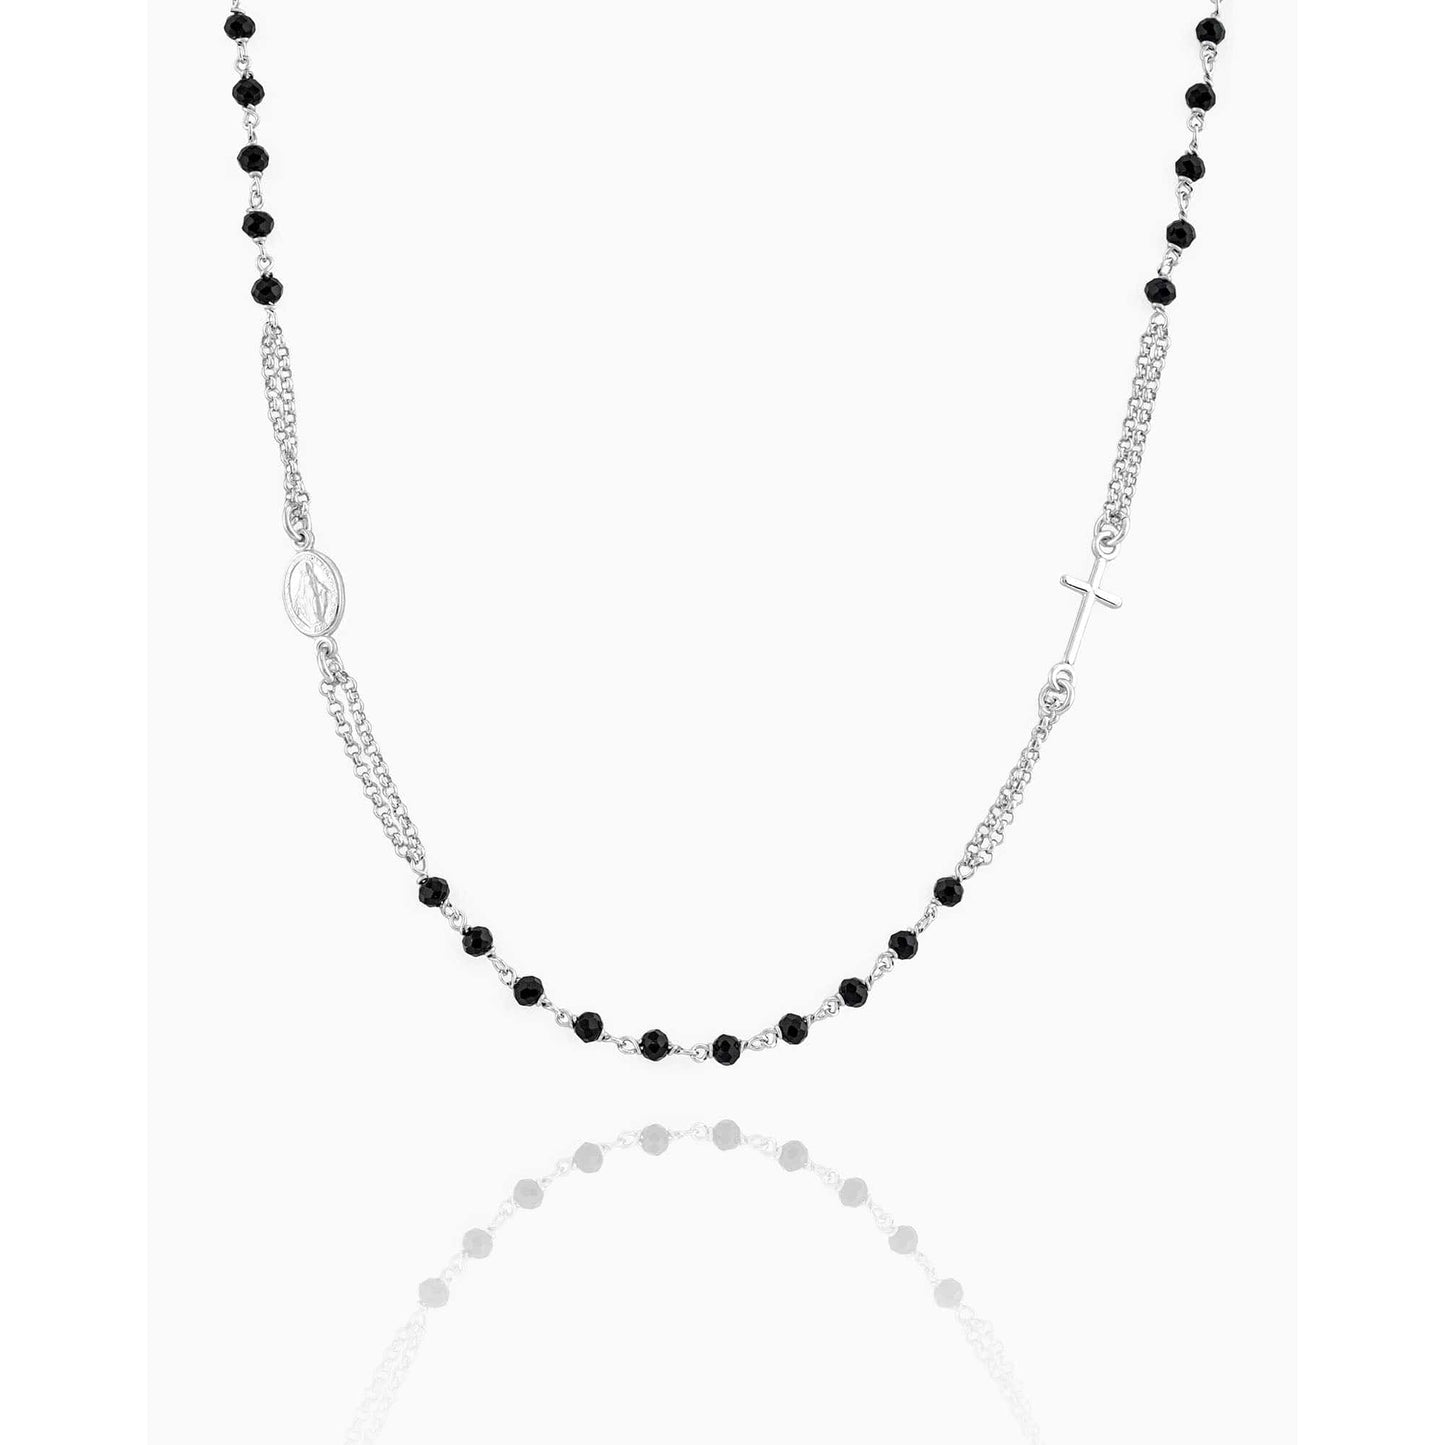 MONDO CATTOLICO Prayer Beads STERLING SILVER PLATED SACRED HEART 3 MM BLACK BEADS NECKLACE